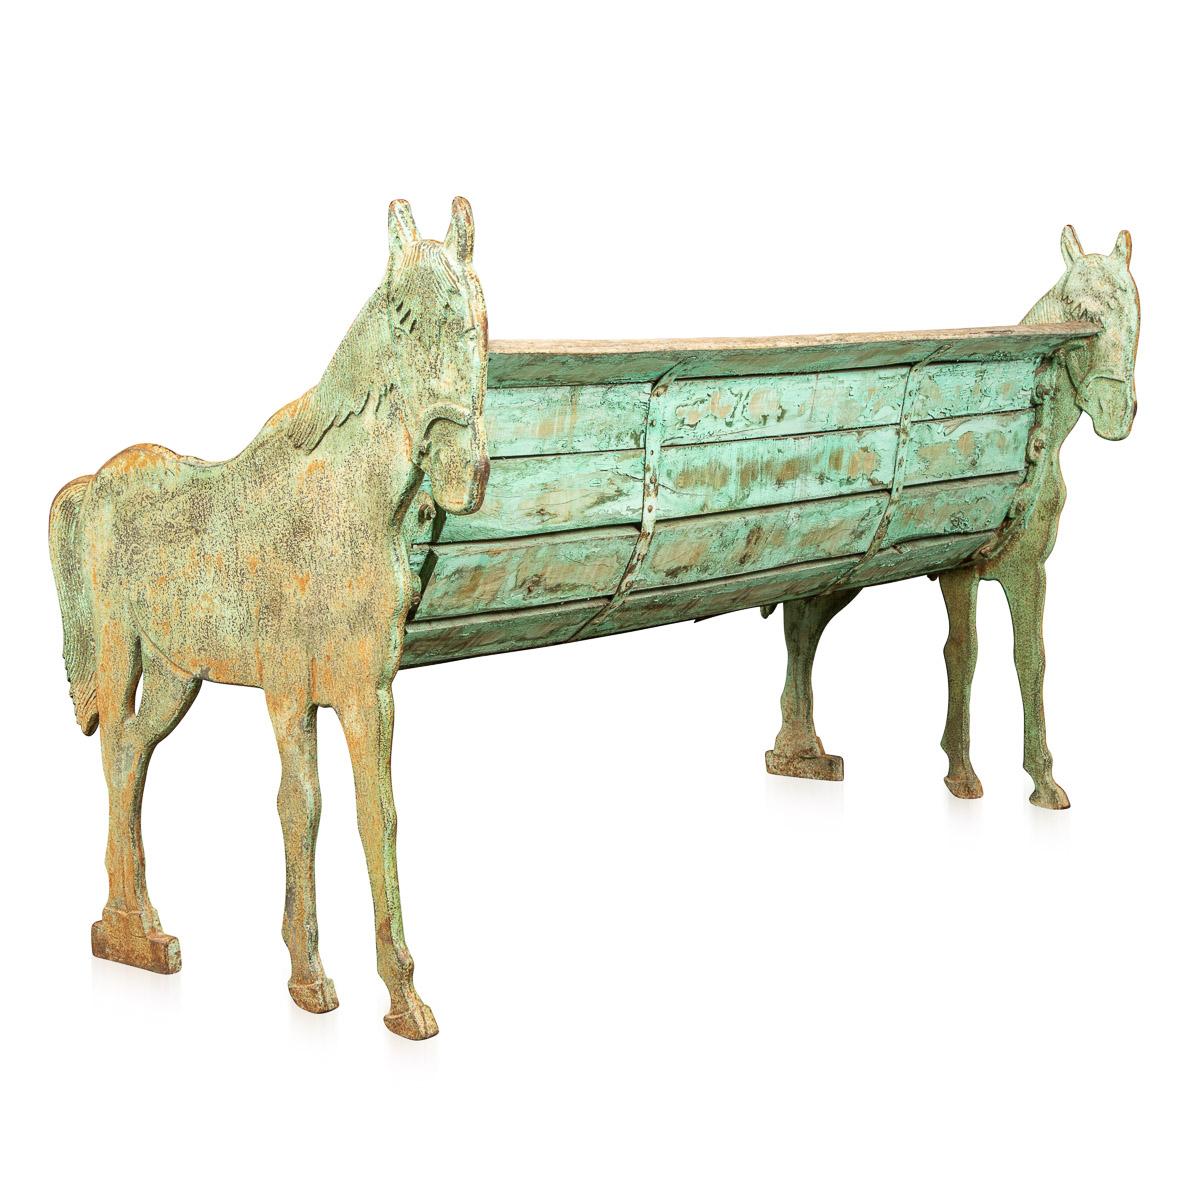 Antique early-20th century French garden bench with verdi gris cast iron ponies at either end of the wooden bench c.1900.

Condition
In fair condition - wear and tear consistent with age.

Size
Width: 70cm
Depth: 43cm
Height: 90cm
Seat